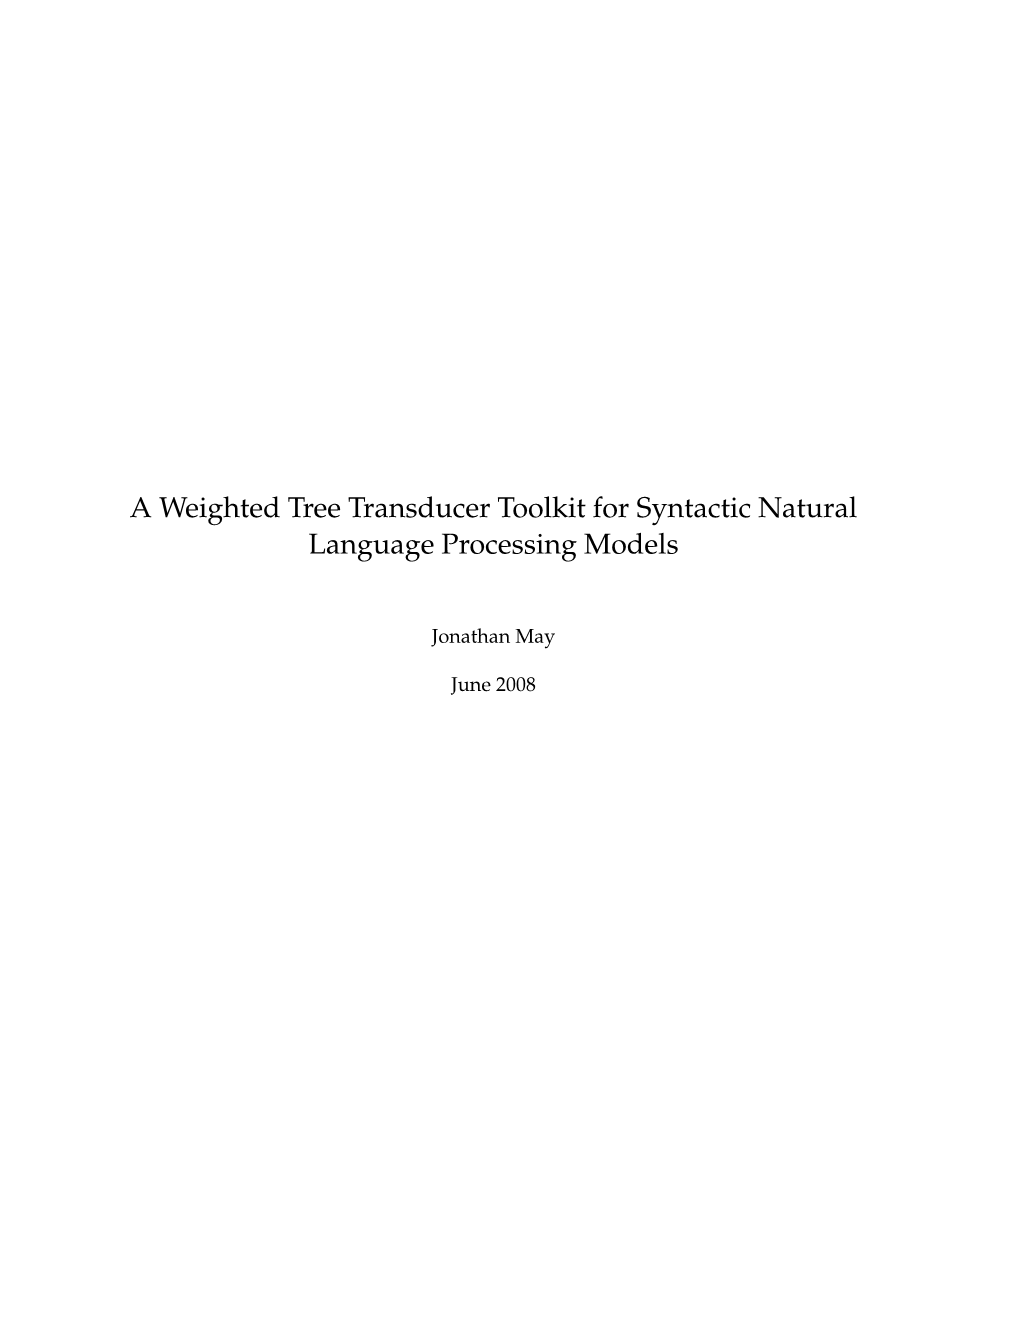 A Weighted Tree Transducer Toolkit for Syntactic Natural Language Processing Models